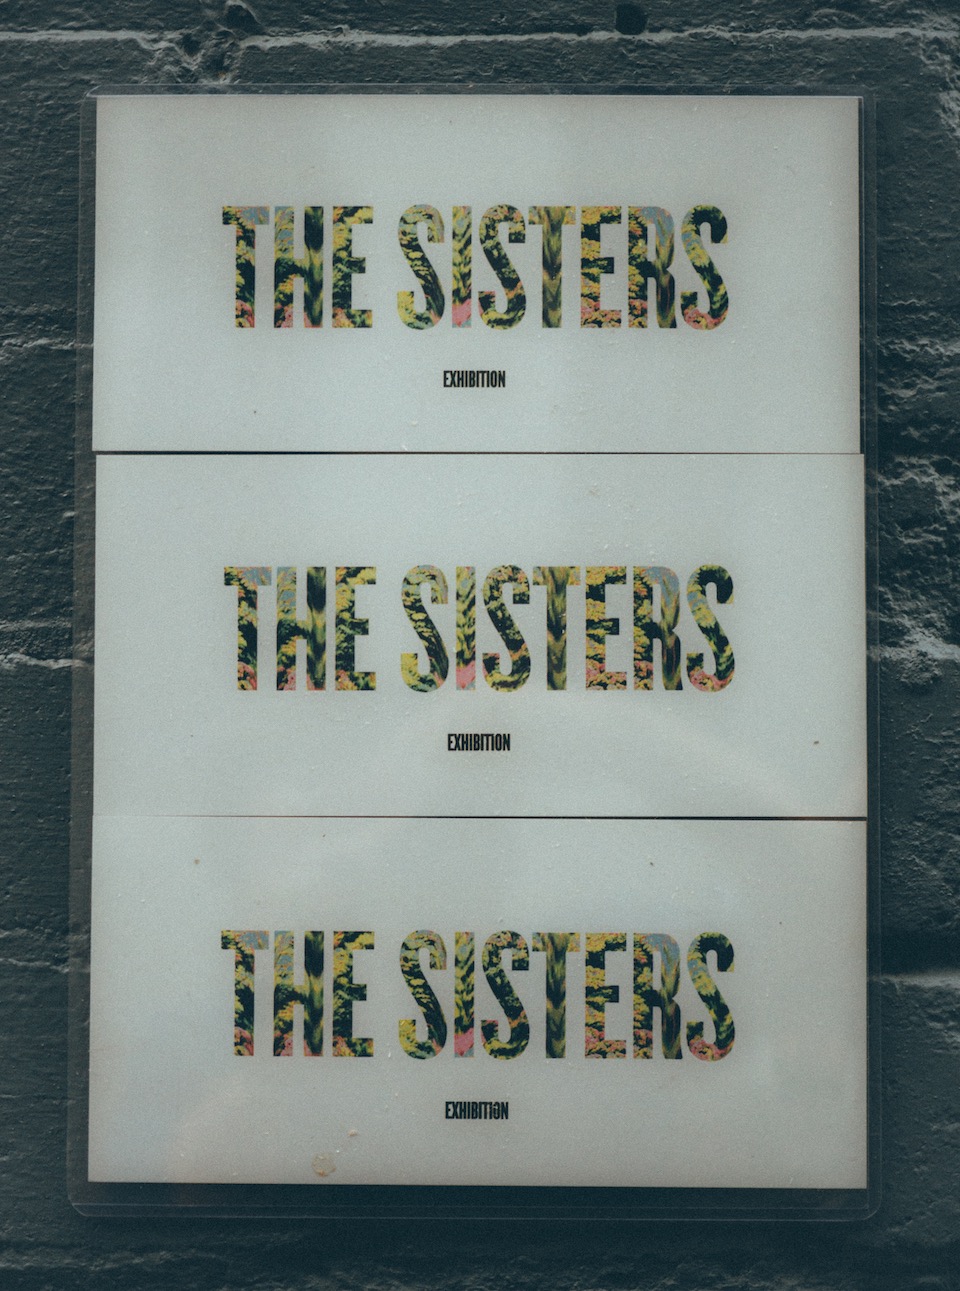 20151024_thesisters-7.jpeg